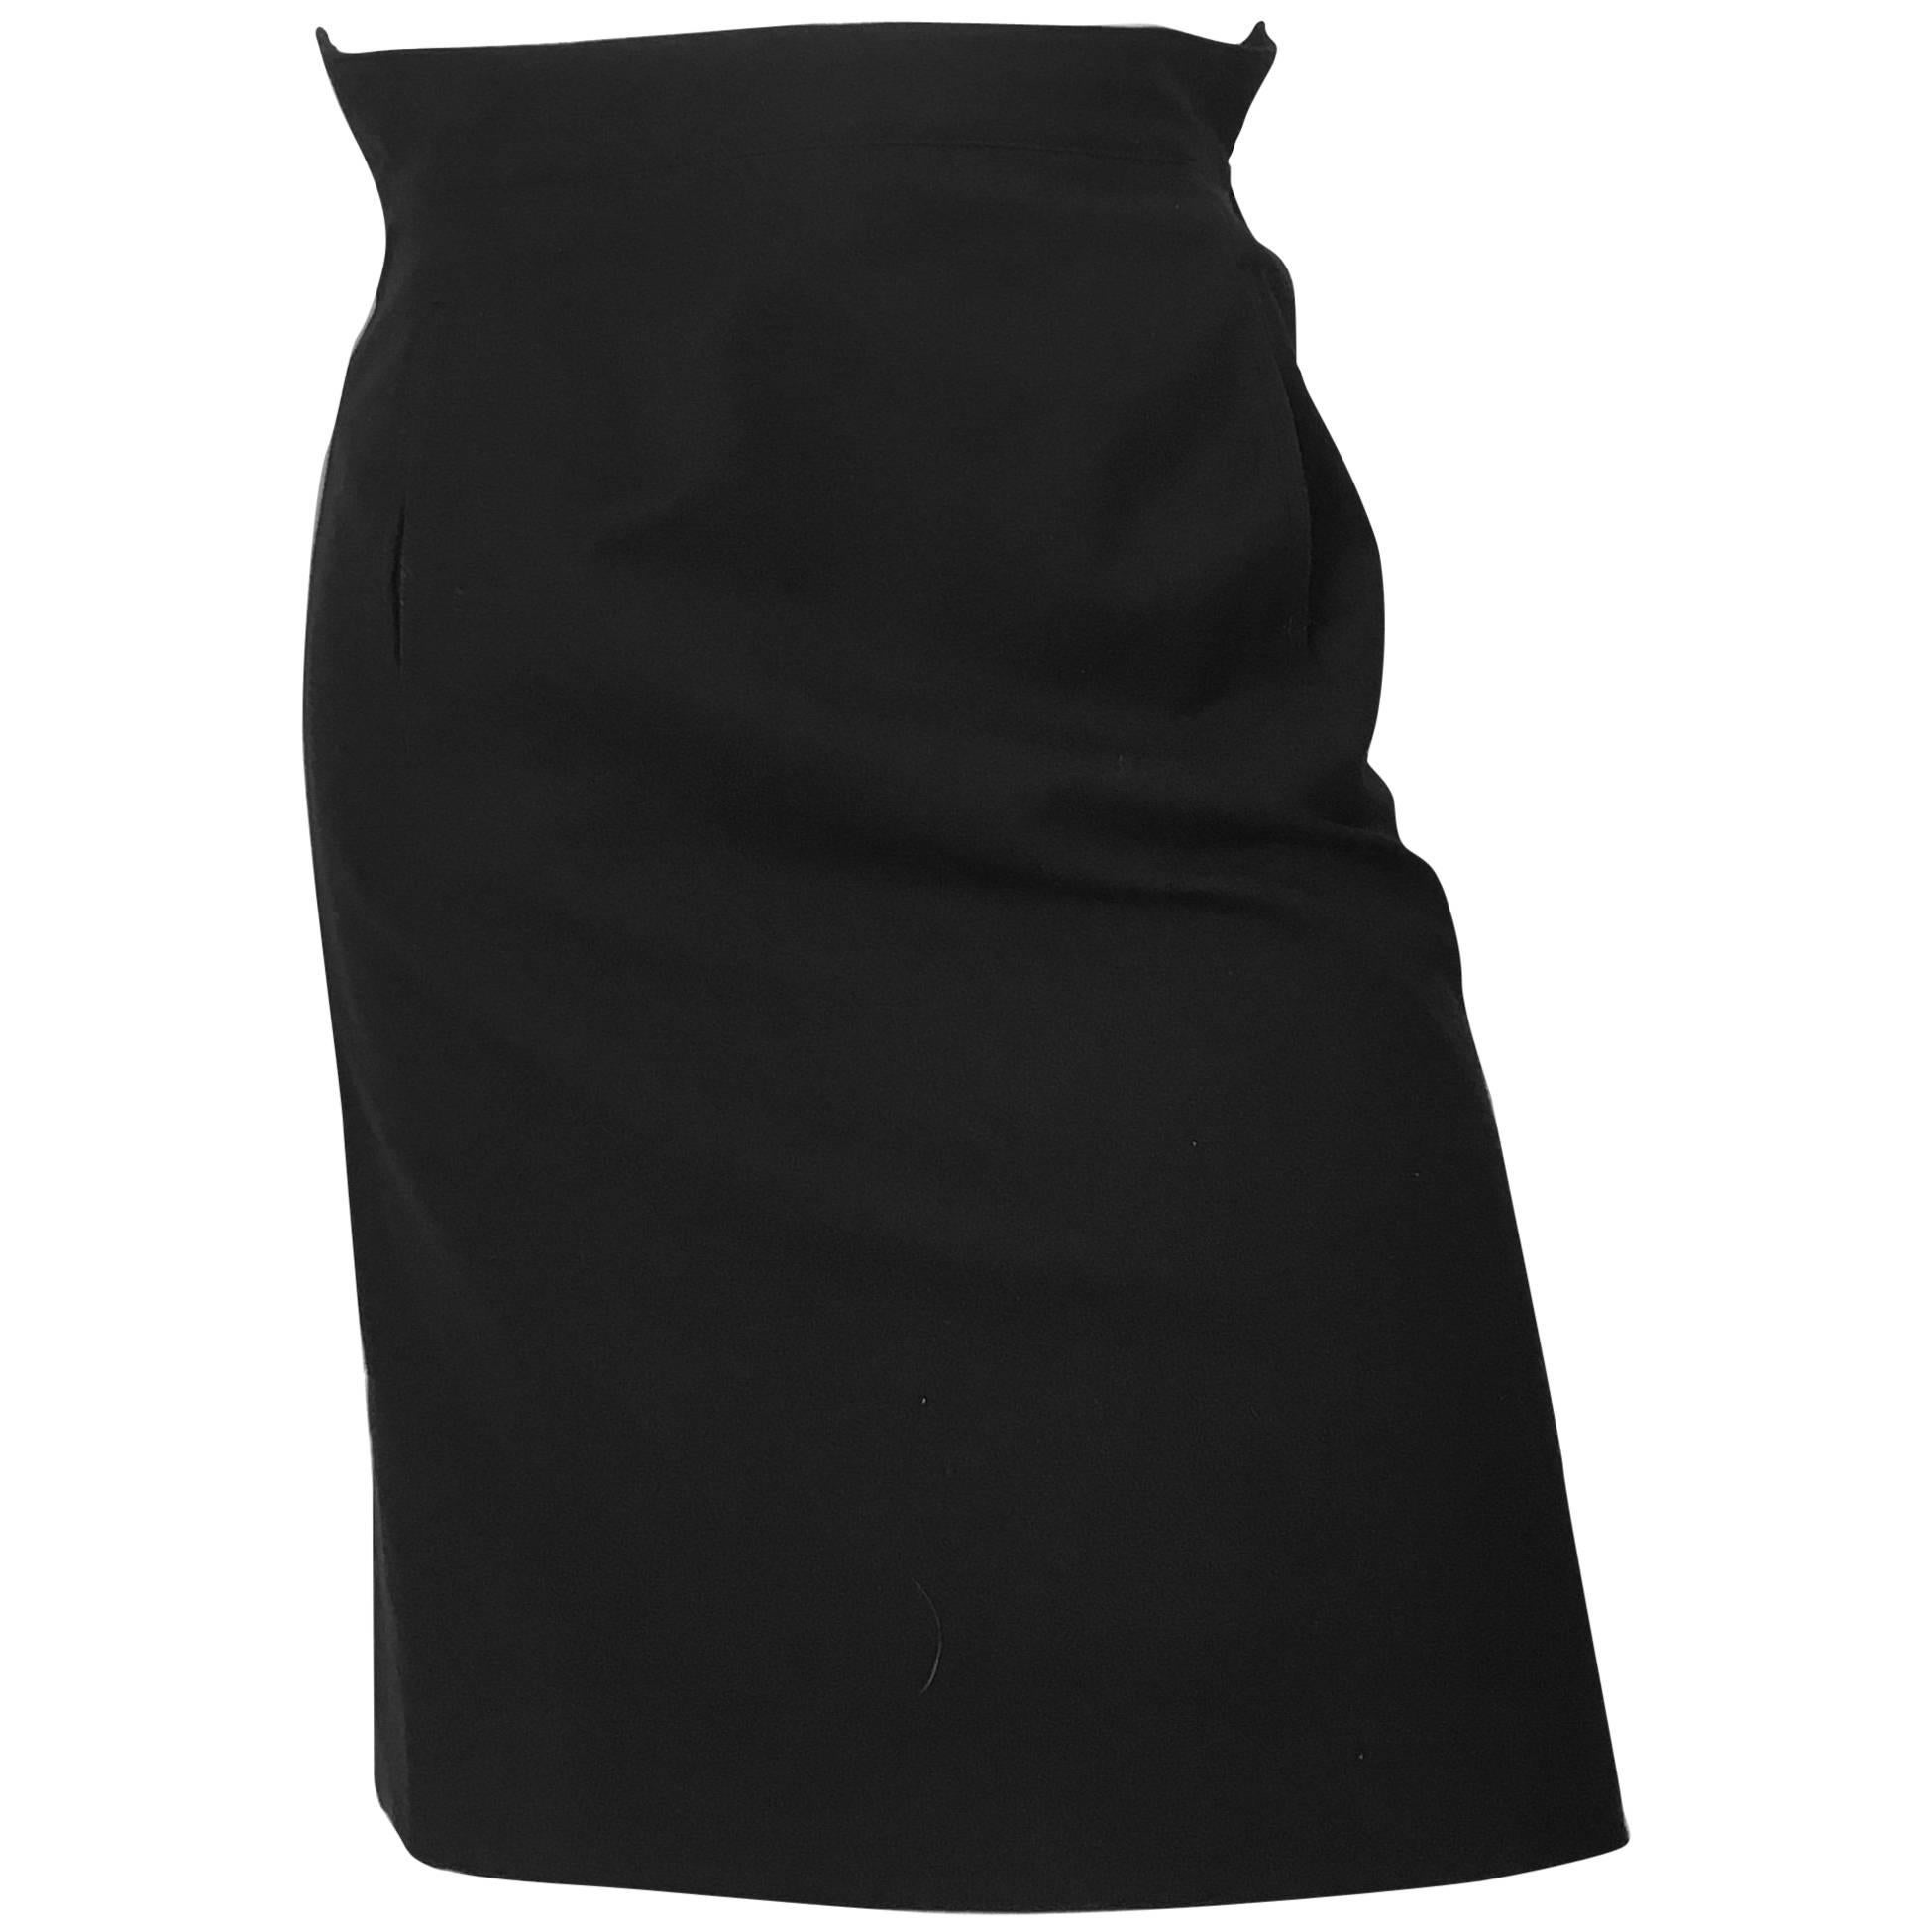 Gianfranco Ferre 1980s Black Wool Wrap Skirt with Pockets Size 6. For Sale